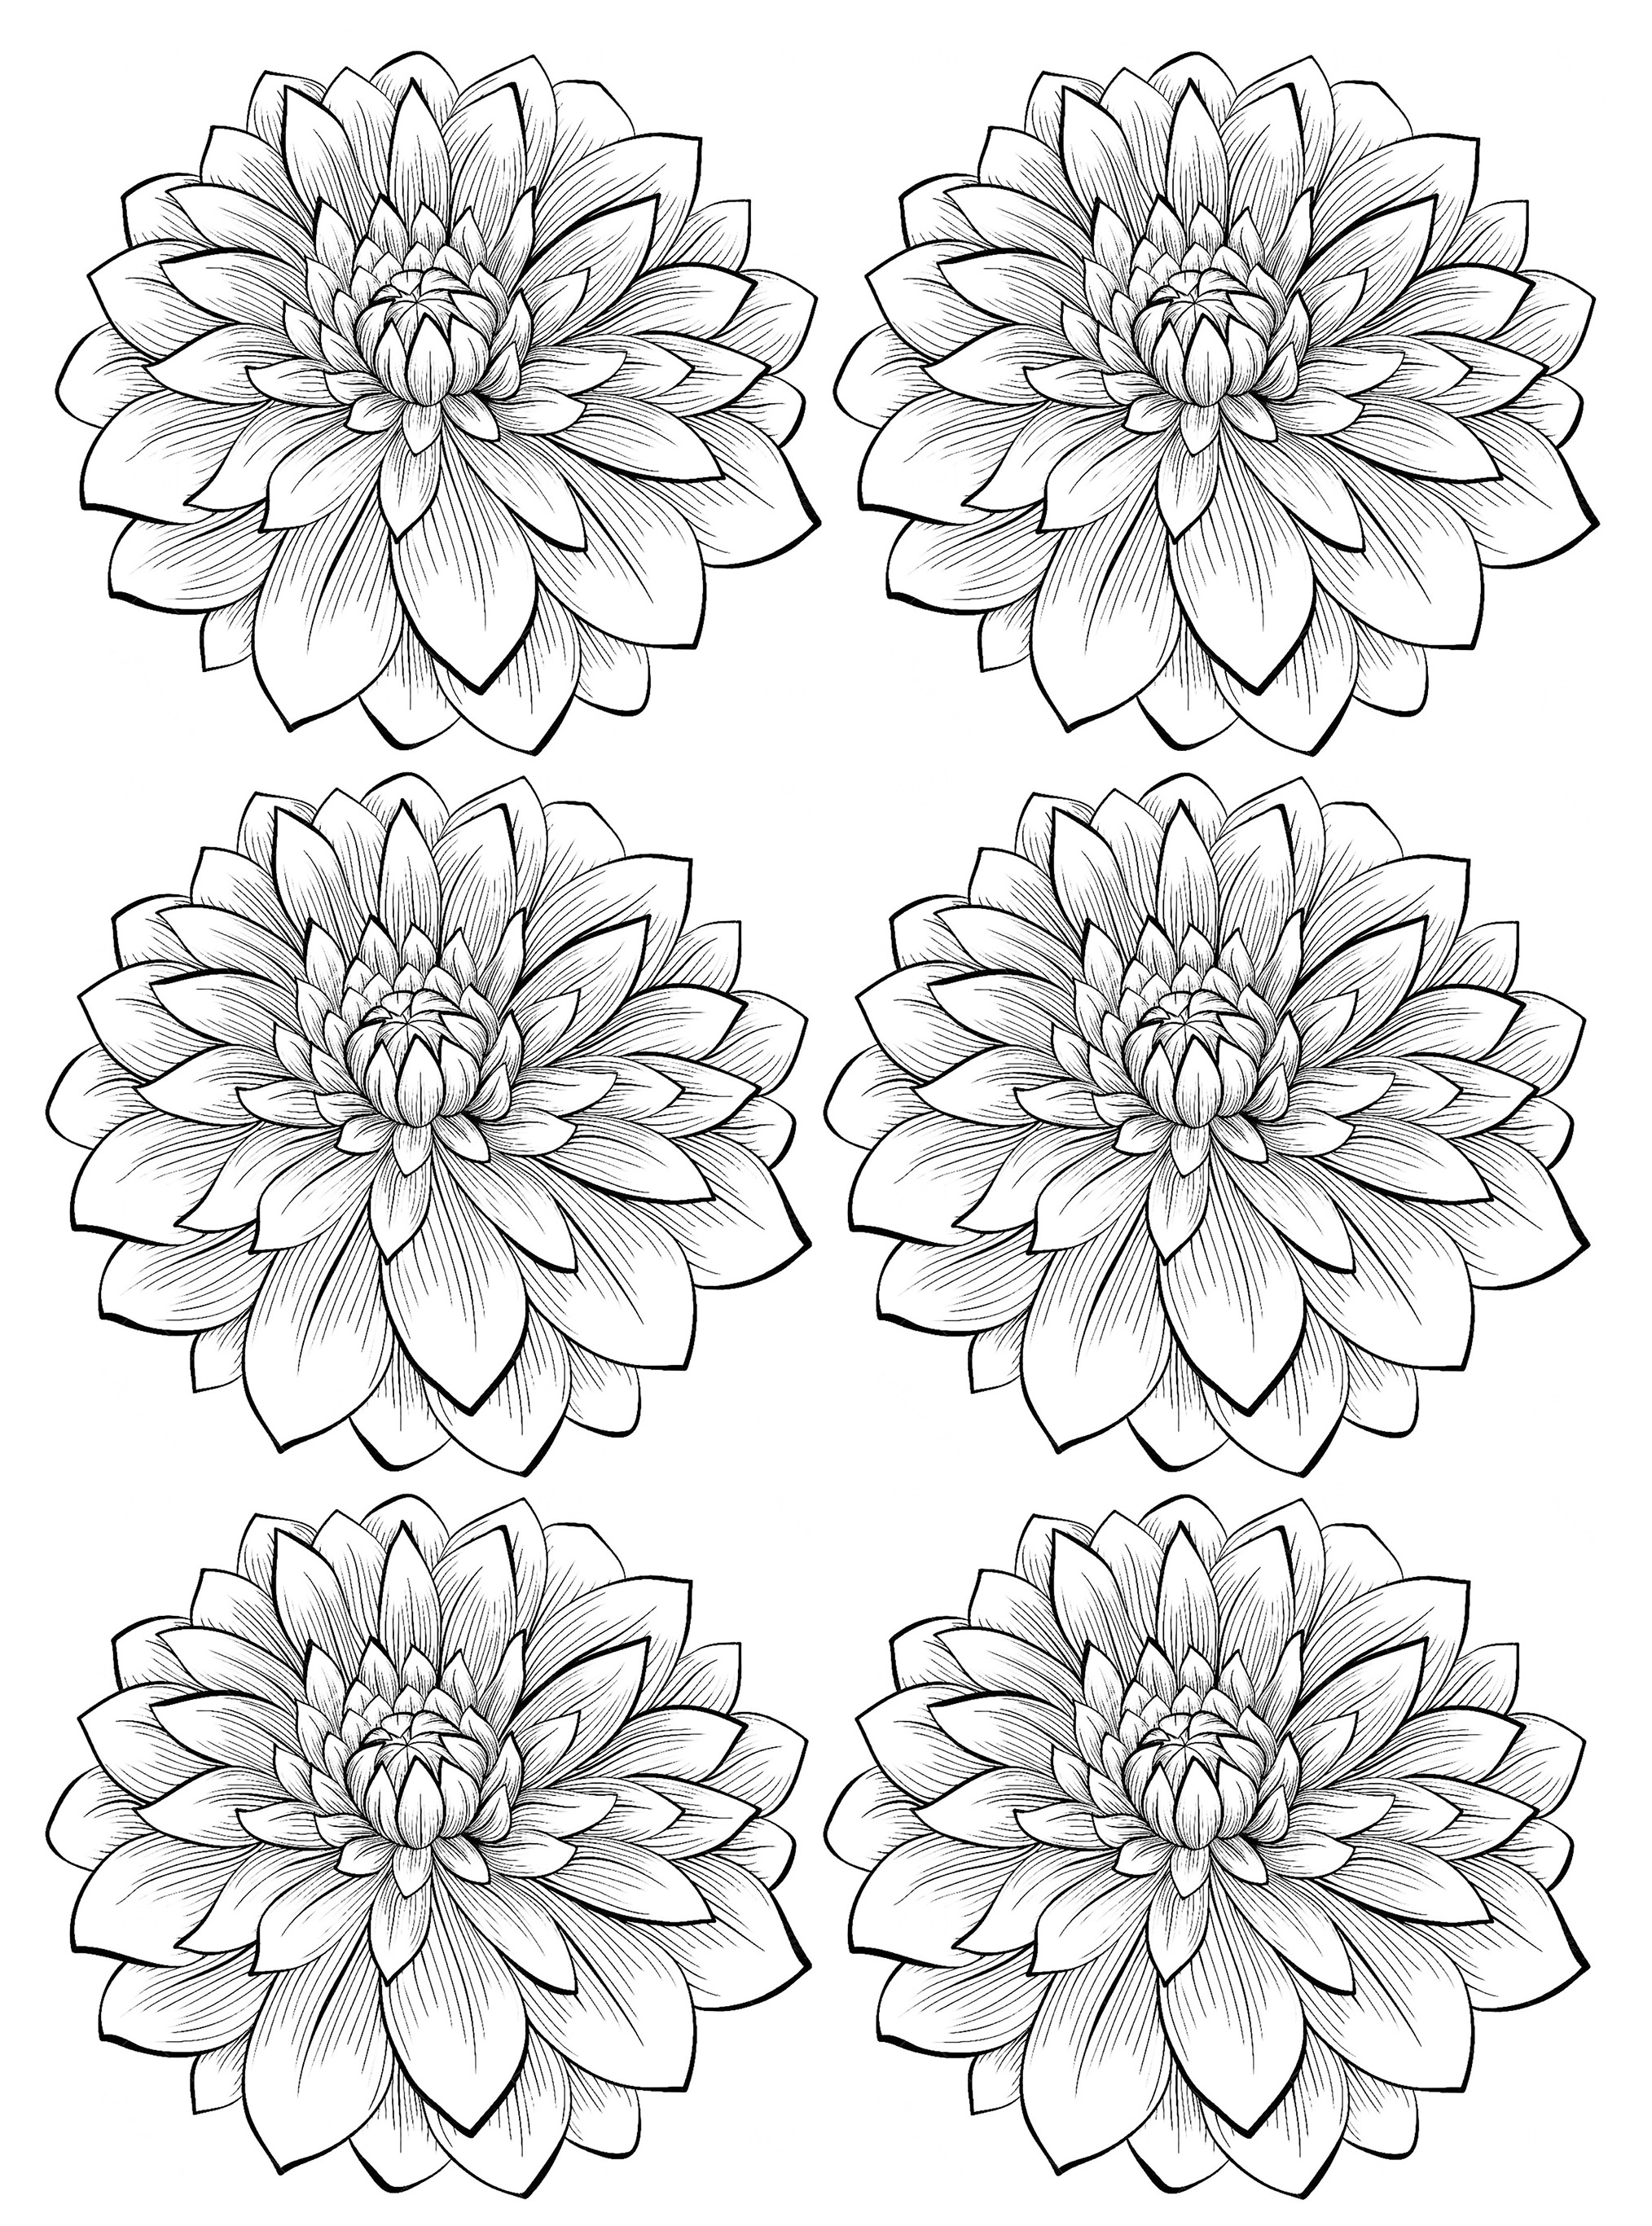 Download Six dahlia flower - Flowers Adult Coloring Pages